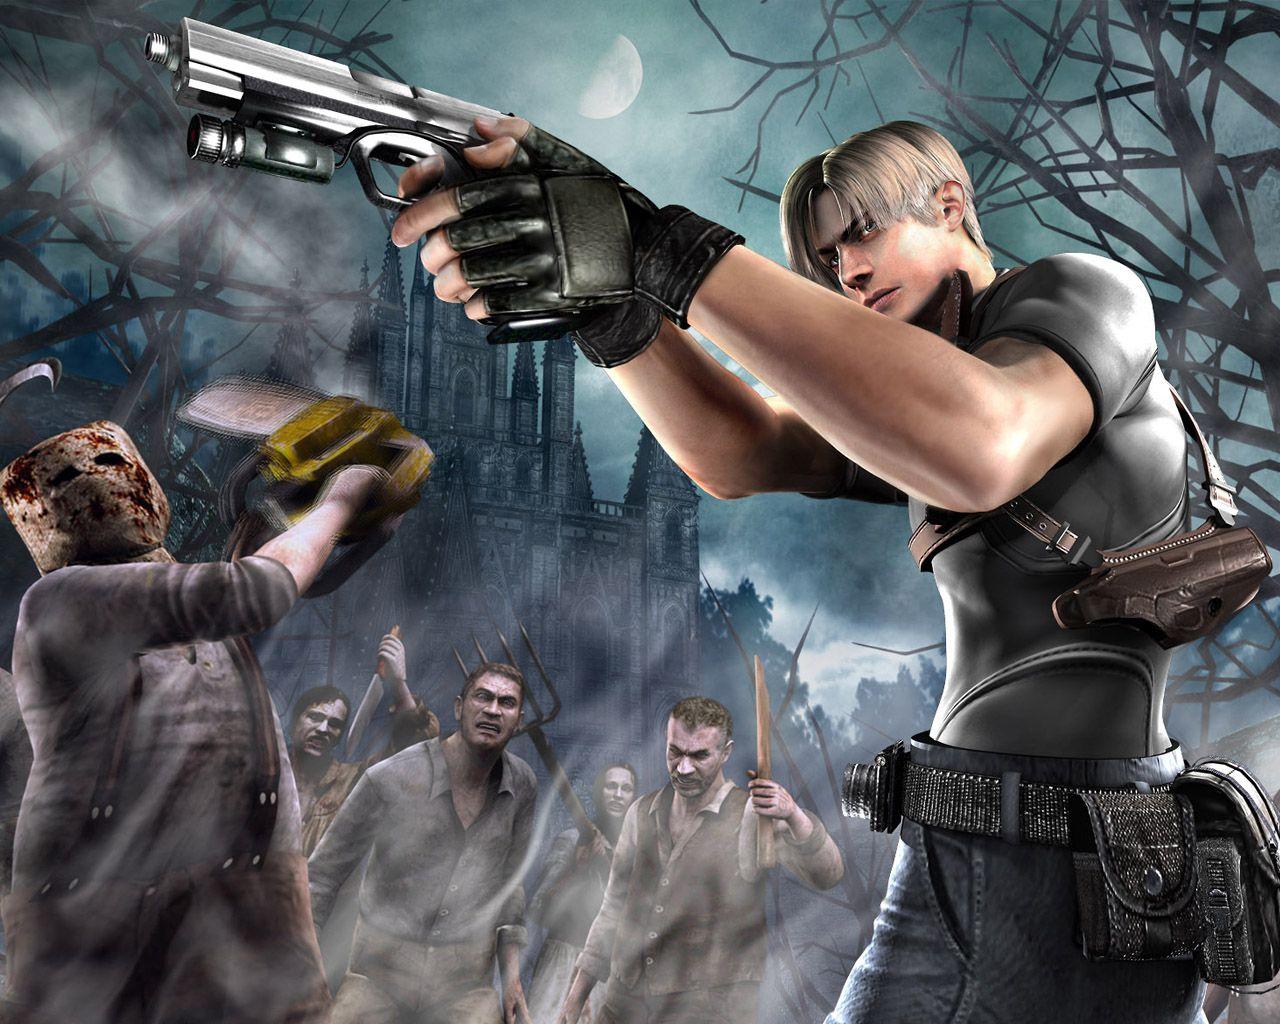 Resident Evil 4 Wallpapers Top Free Resident Evil 4 Backgrounds Wallpaperaccess